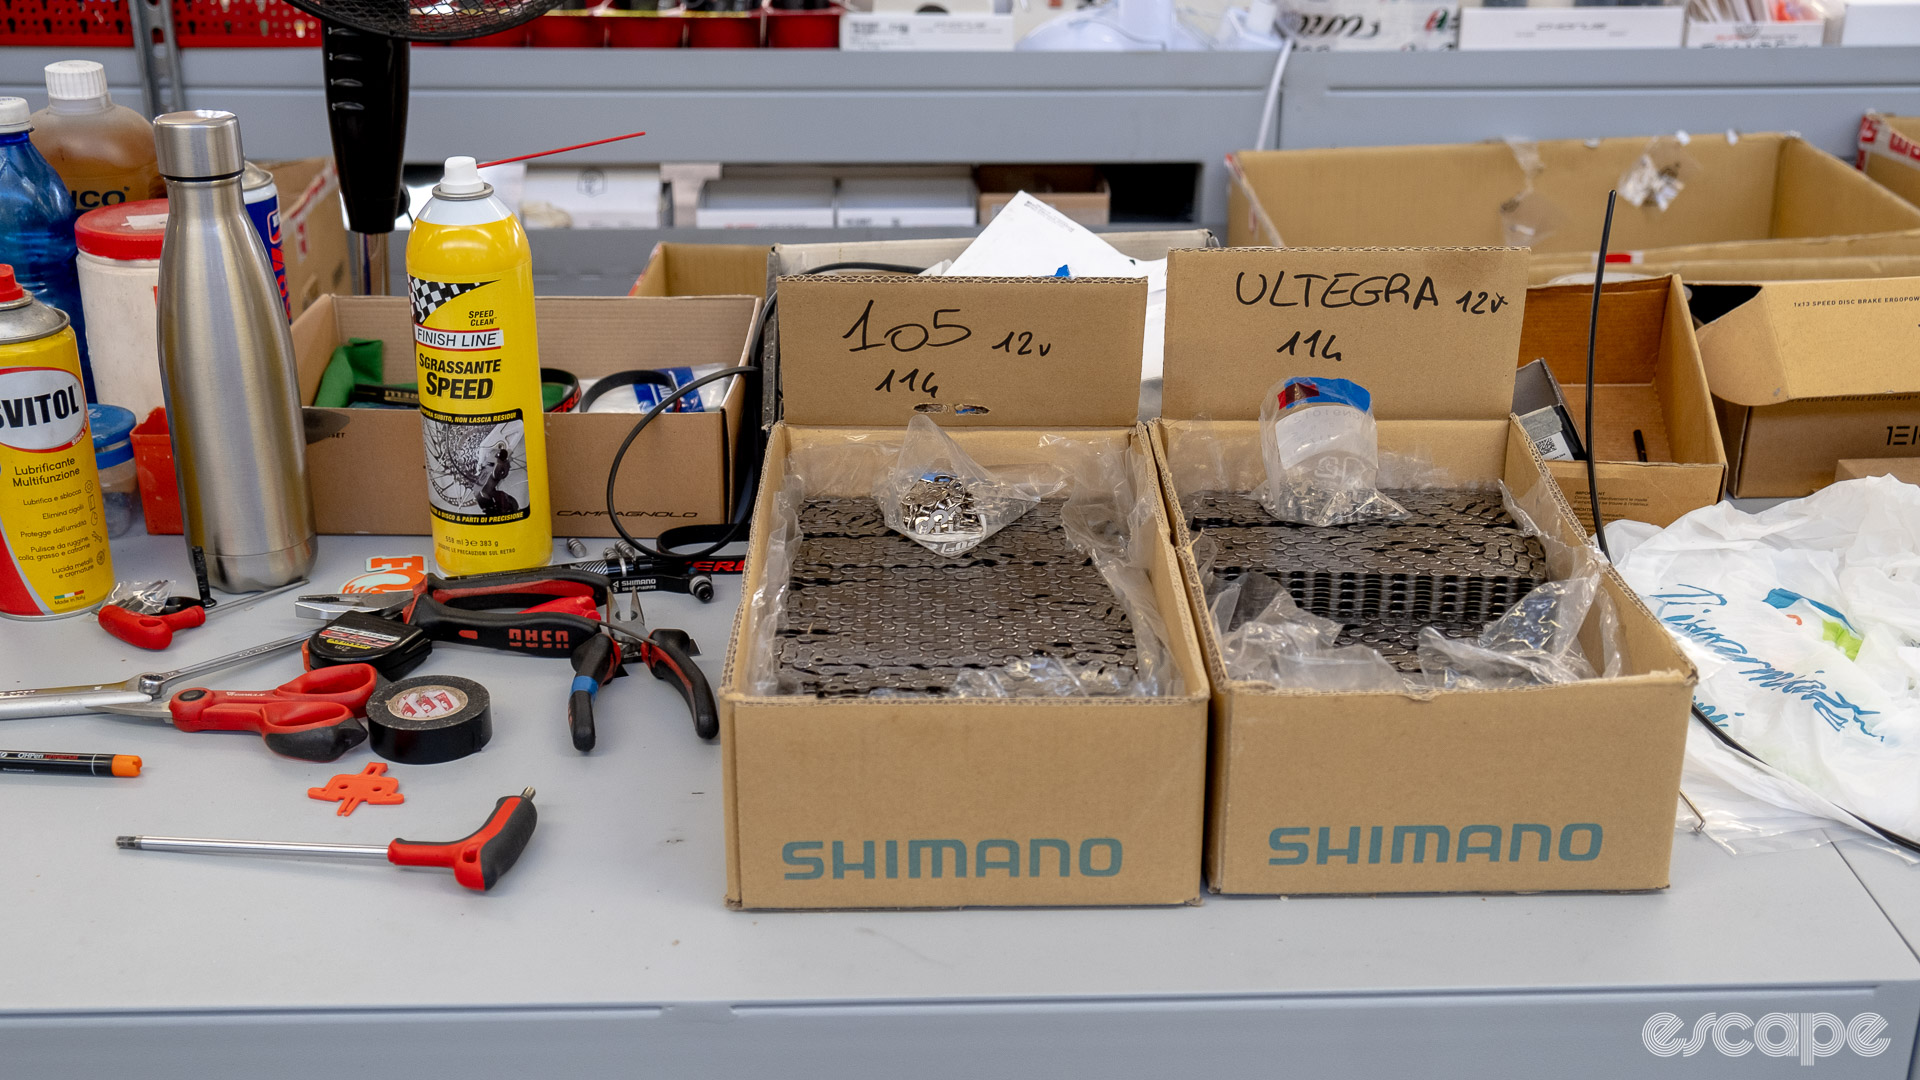 The photo shows two boxes of Shimano chains, one with Ultegra chains and one with 105 chains.